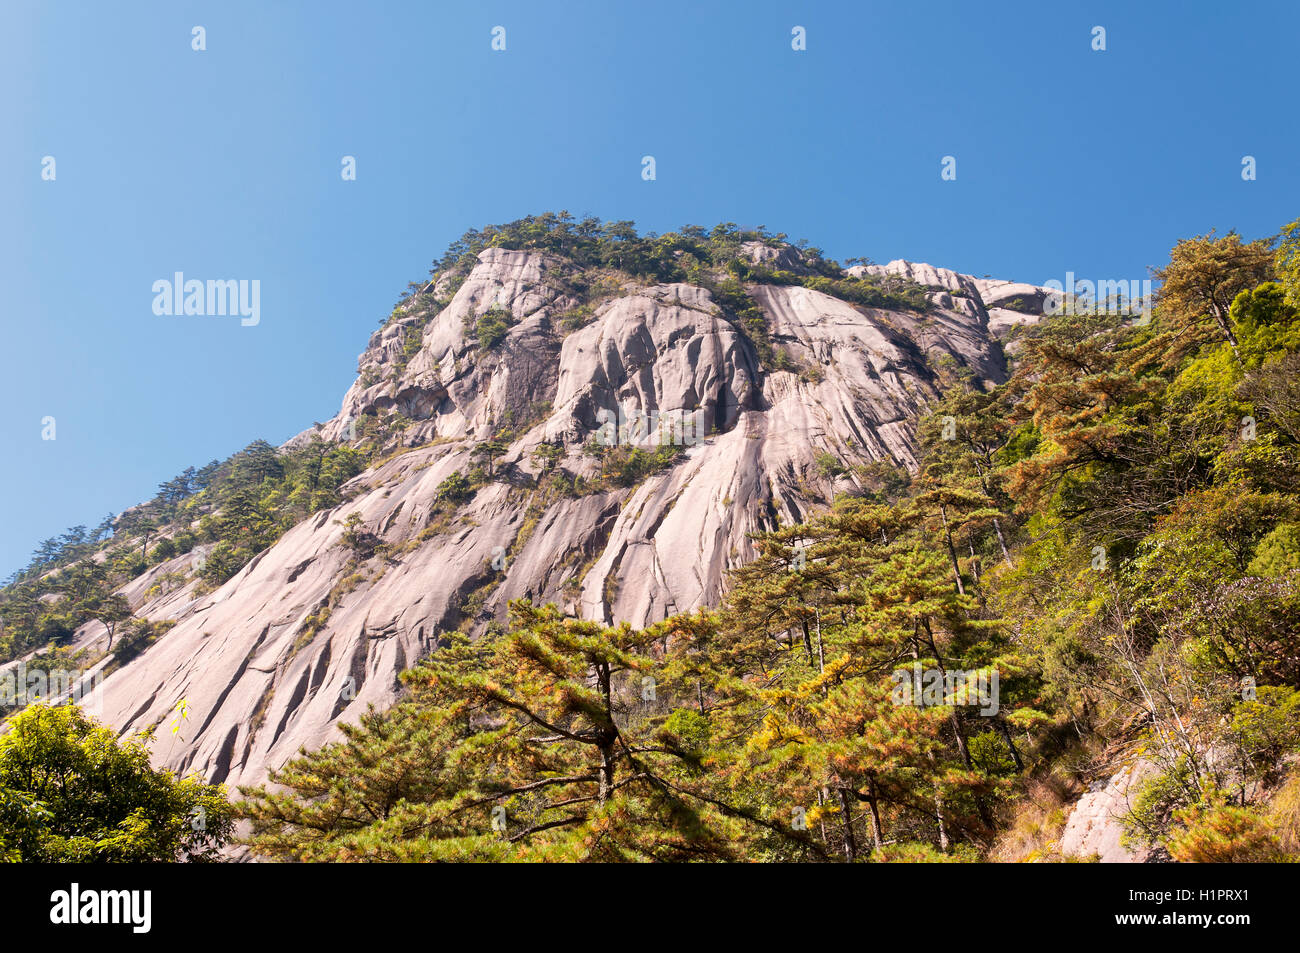 The dramatic landscape of Huangshan or Yellow Mountain located in Anhui Province China. Stock Photo